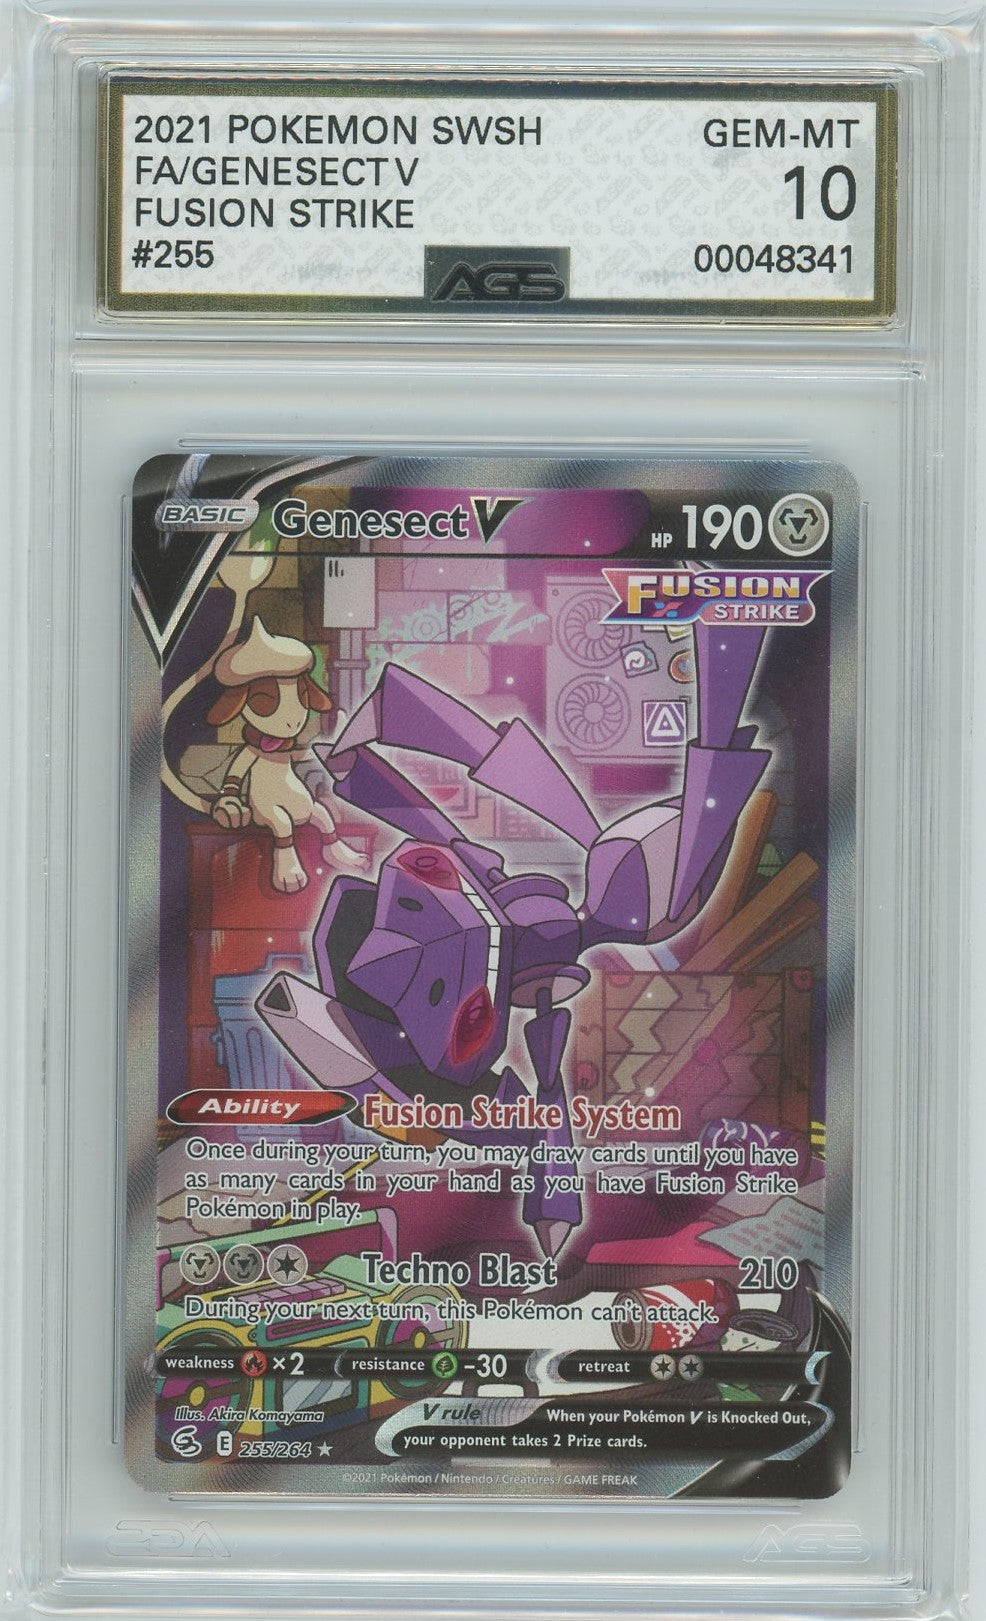 AGS (GEM-MT 10) Genesect V #255 - Fusion Strike (#00048341)